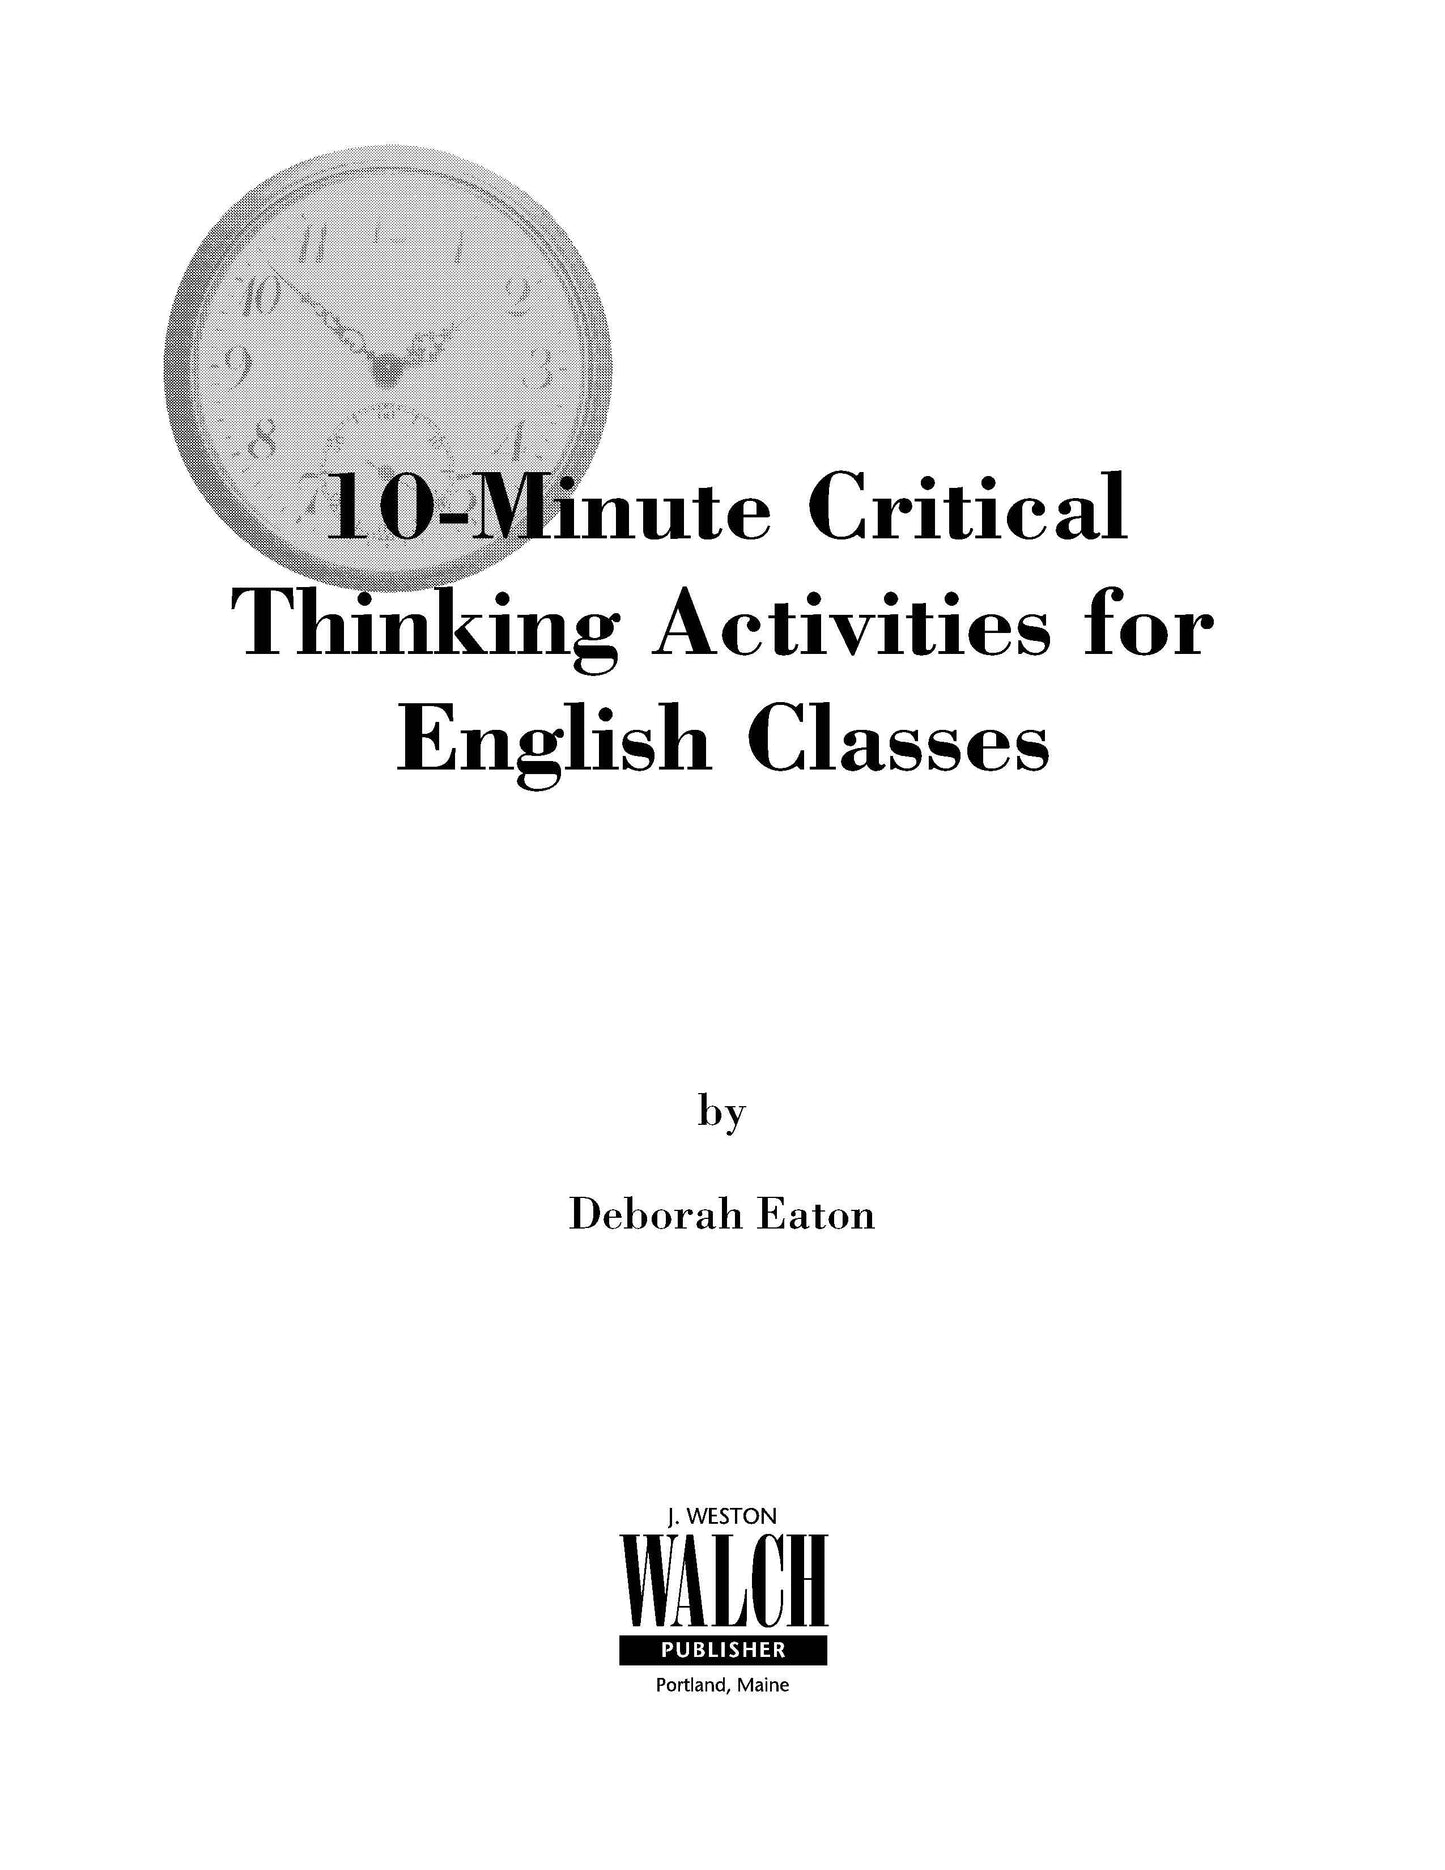 10 Minute Critical Thinking Activities for English,Bright Education Australia, Book, Grammar, English, School Materials, Games, Puzzles, Activities, Teacher Resources